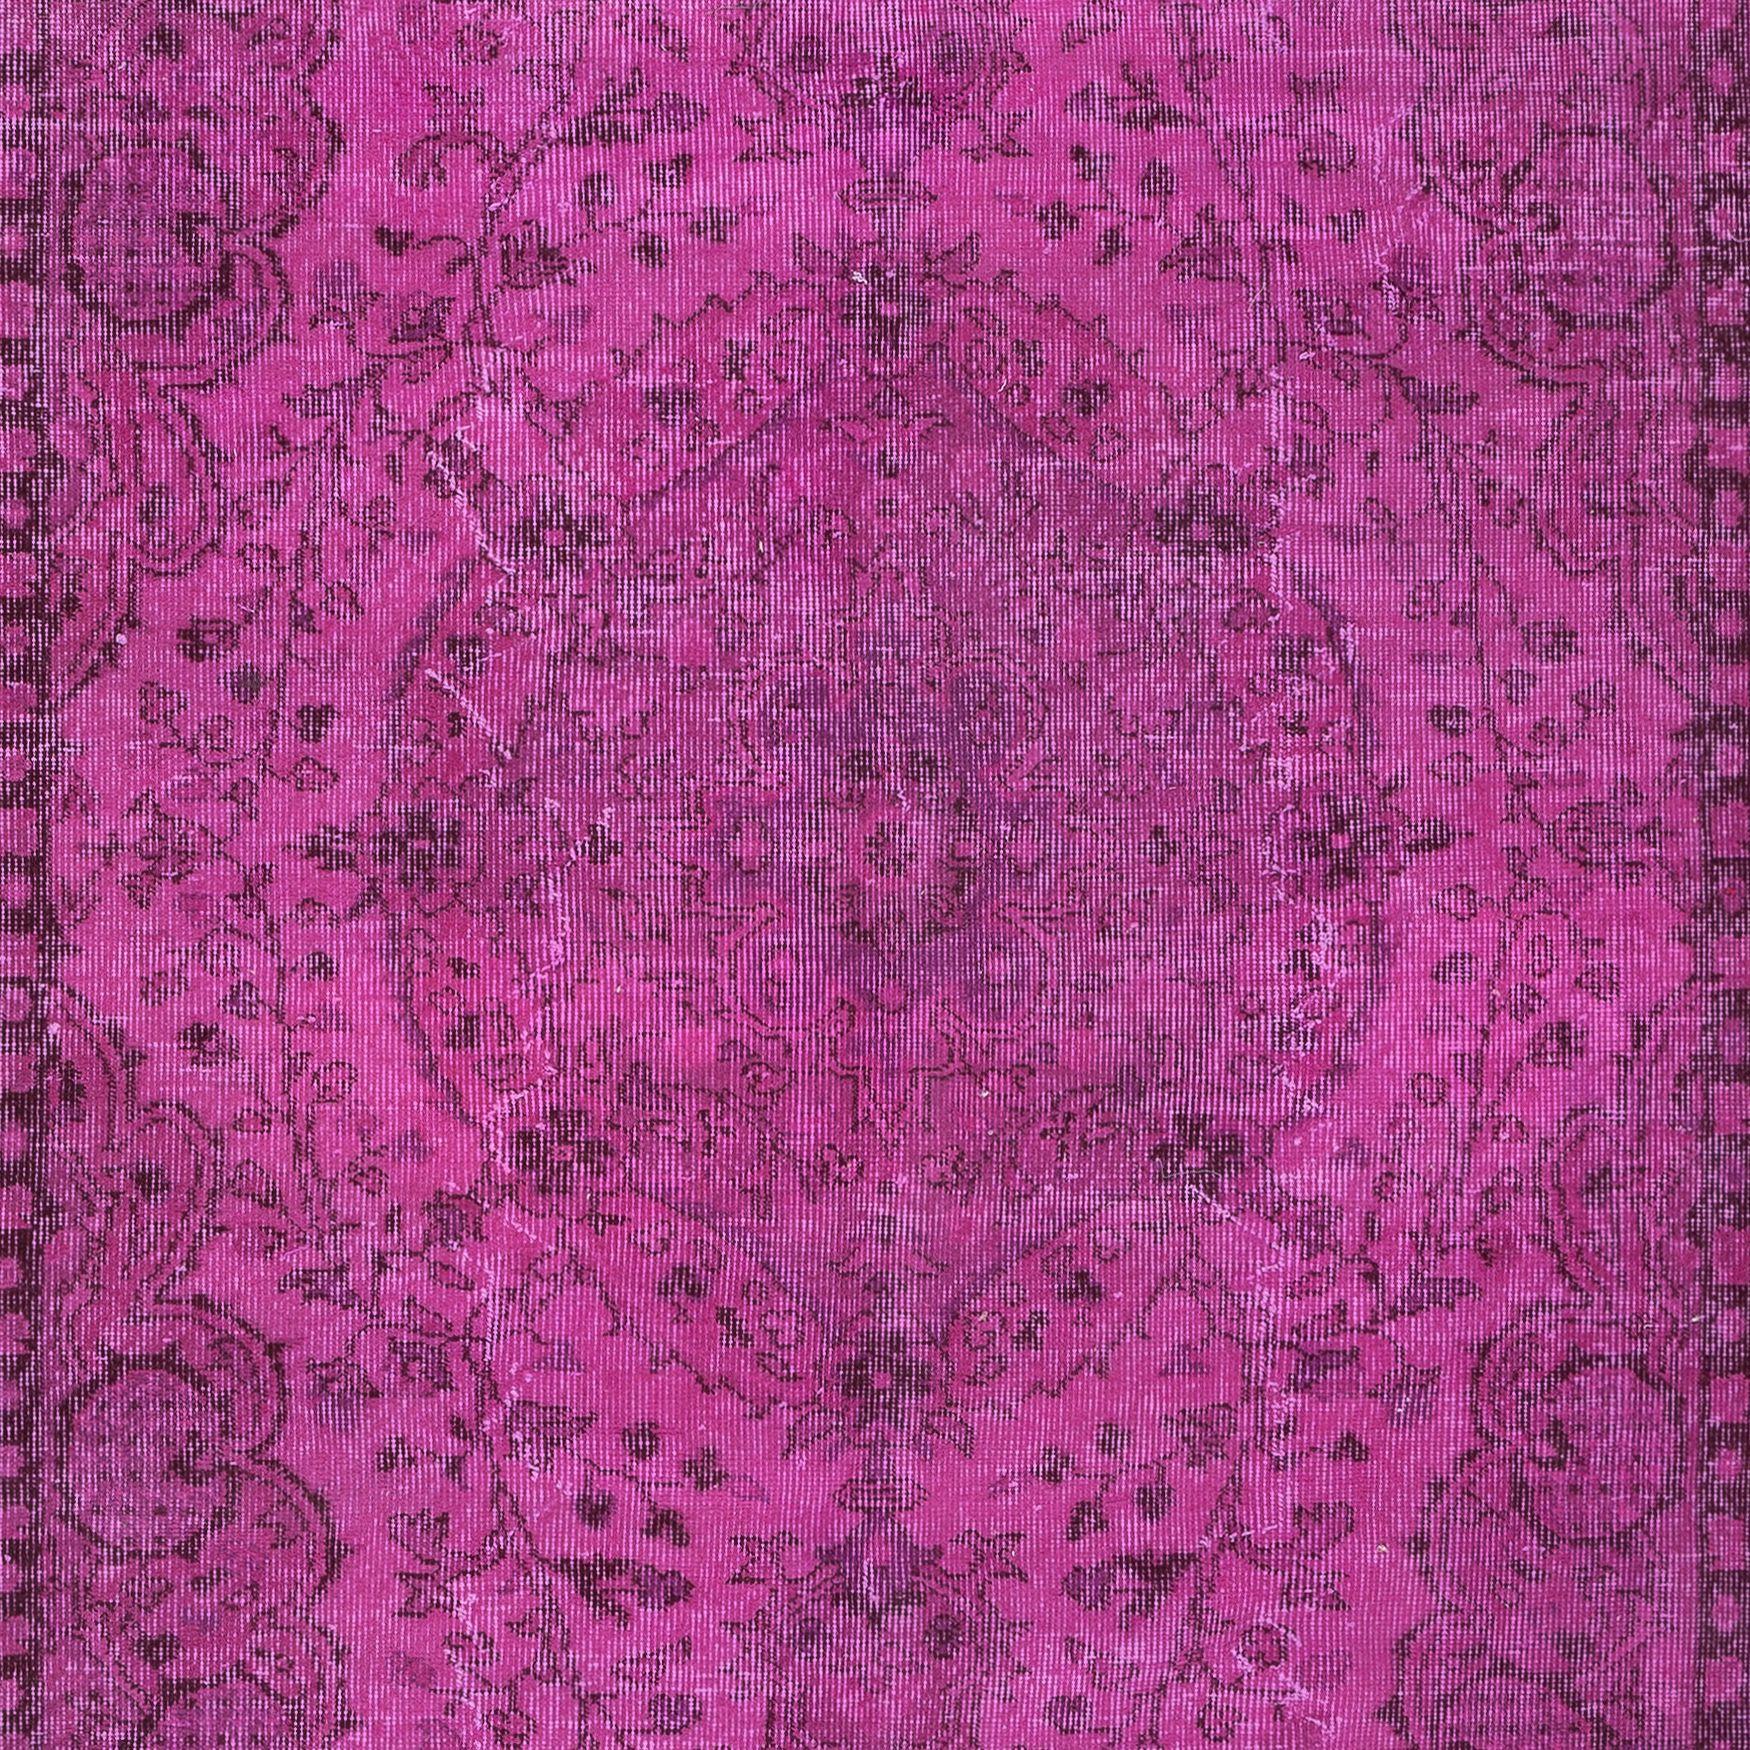 5.6x9 Ft Pink Handmade Turkish Wool Area Rug, Contemporary Low Pile Carpet In Good Condition For Sale In Philadelphia, PA